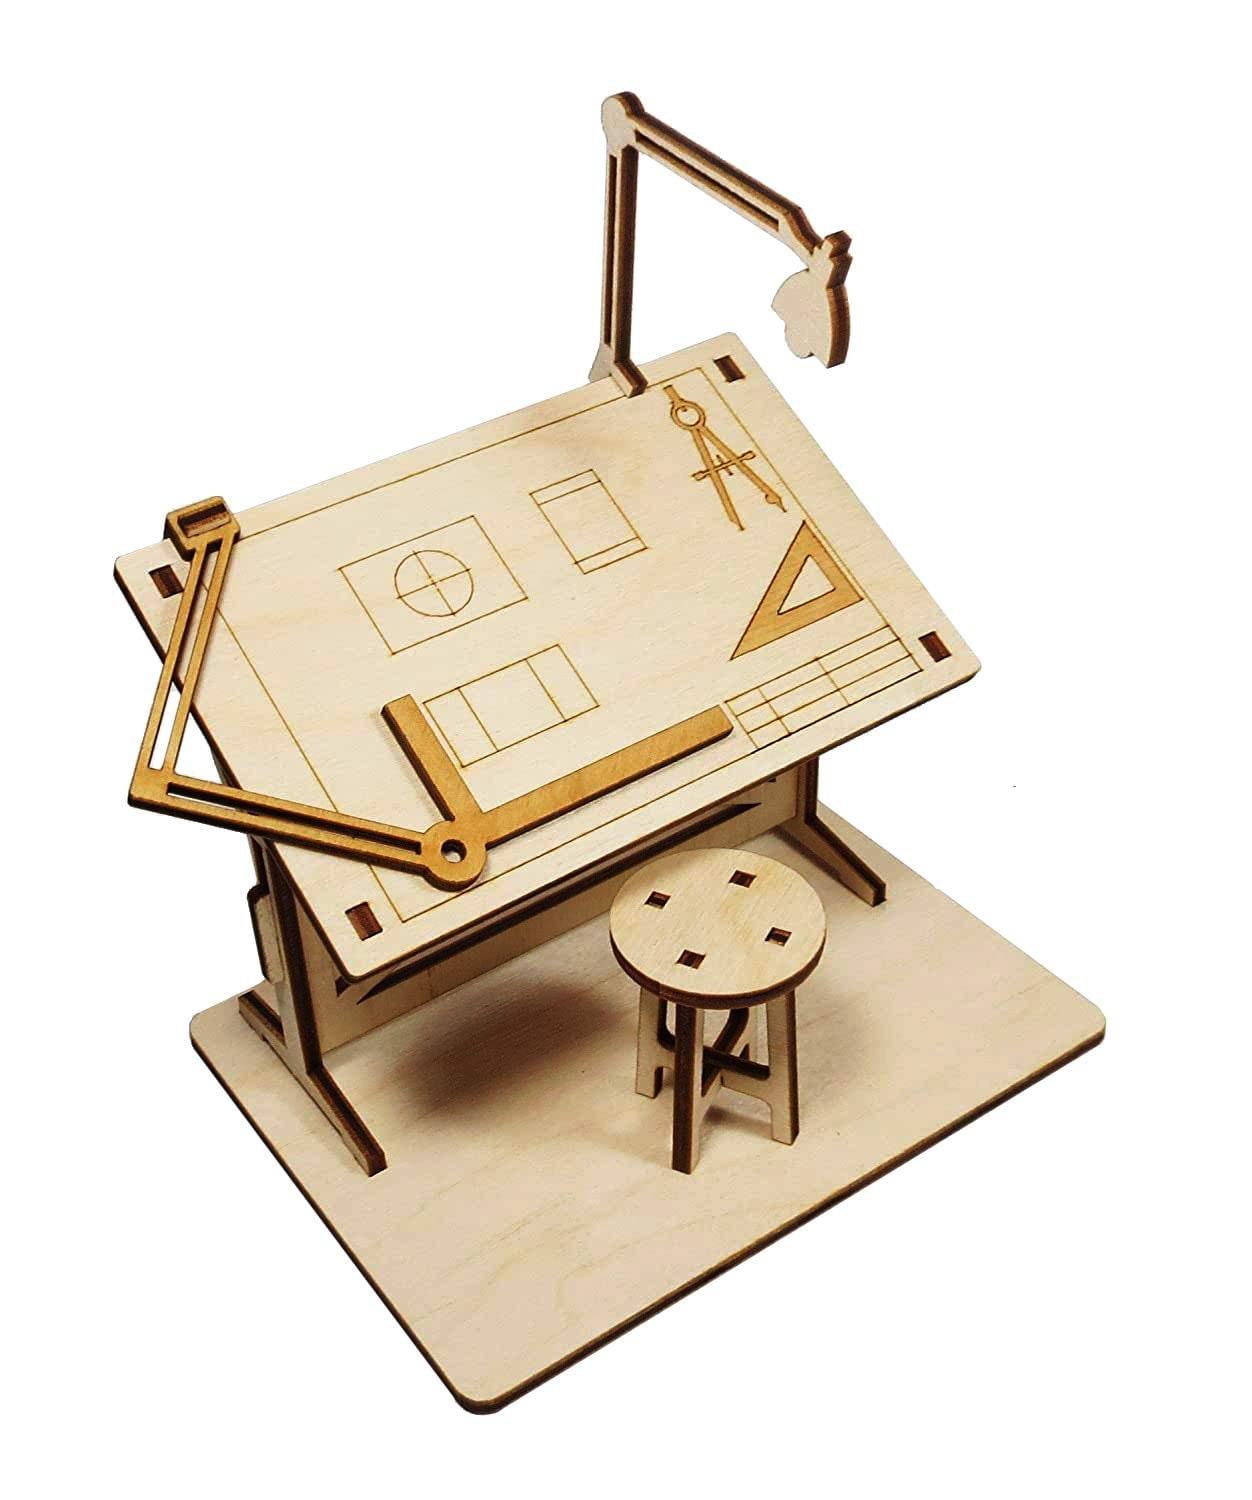 DIY Gifts For Architects & Designers - Drafting Table Kit - DIY Wooden Desk Miniature Furniture With Chair - 3D Wooden Puzzle - Best Gifts - Rajbharti Crafts